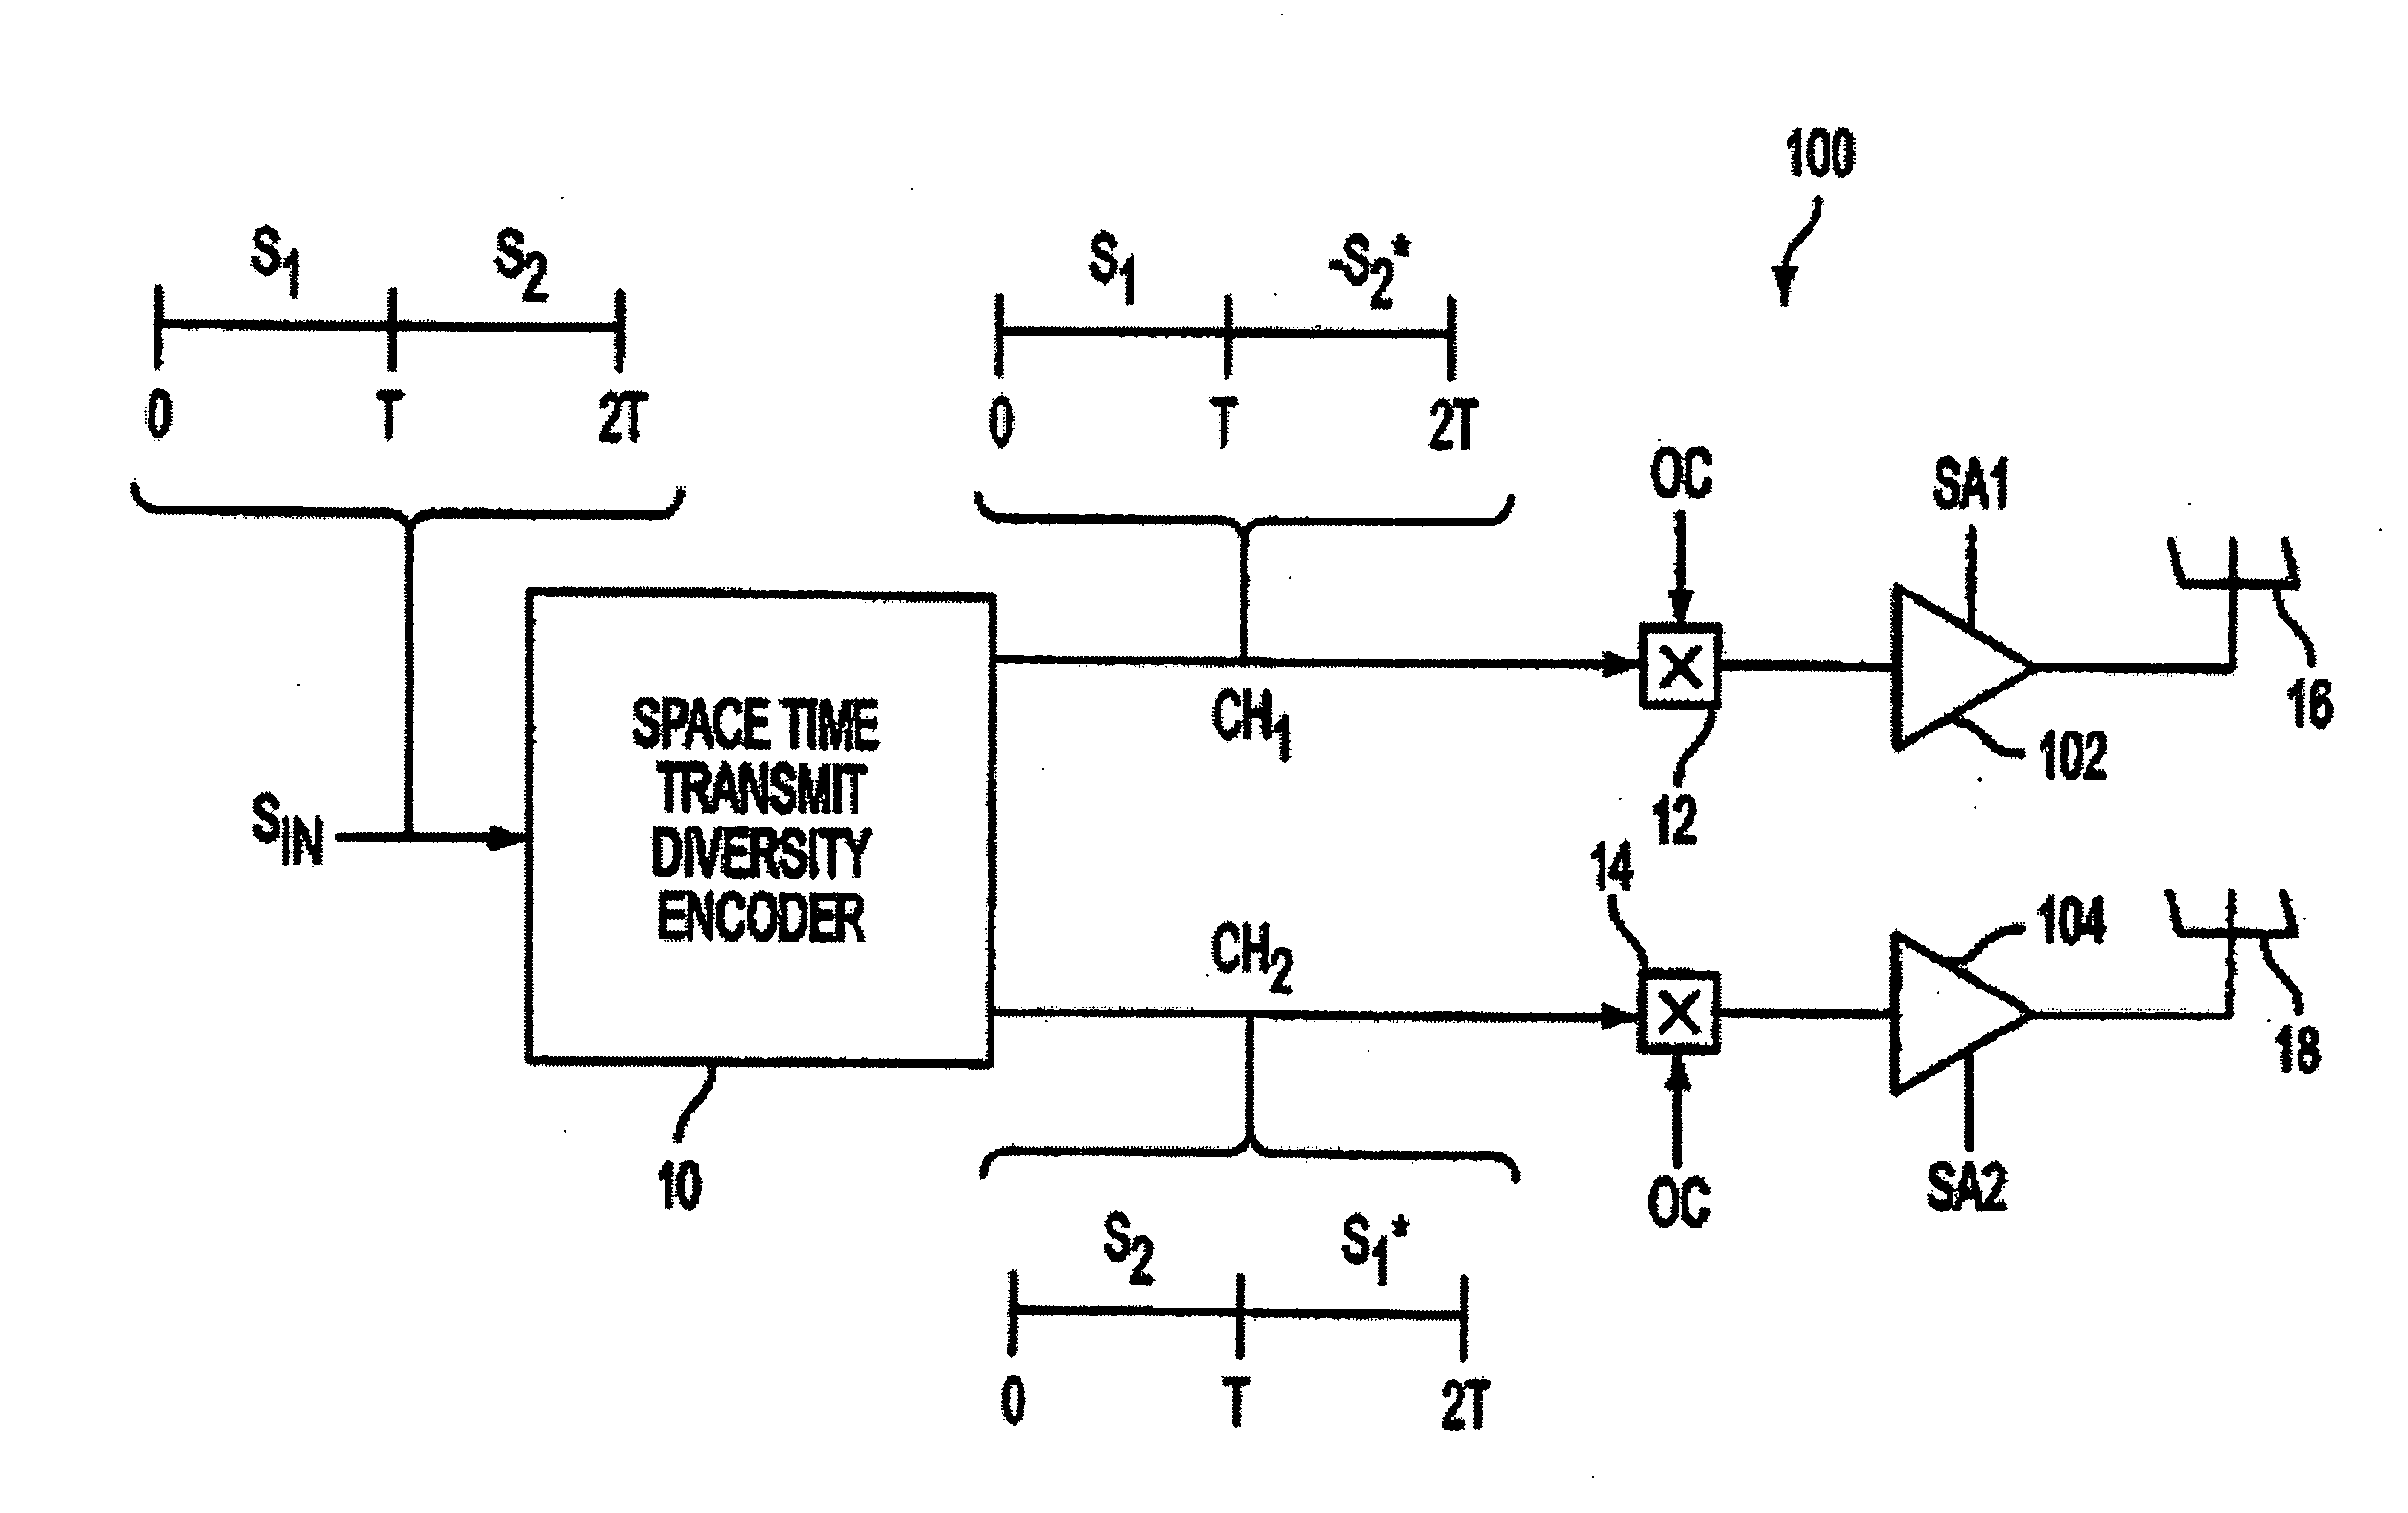 Closed loop feedback system for improved down link performance